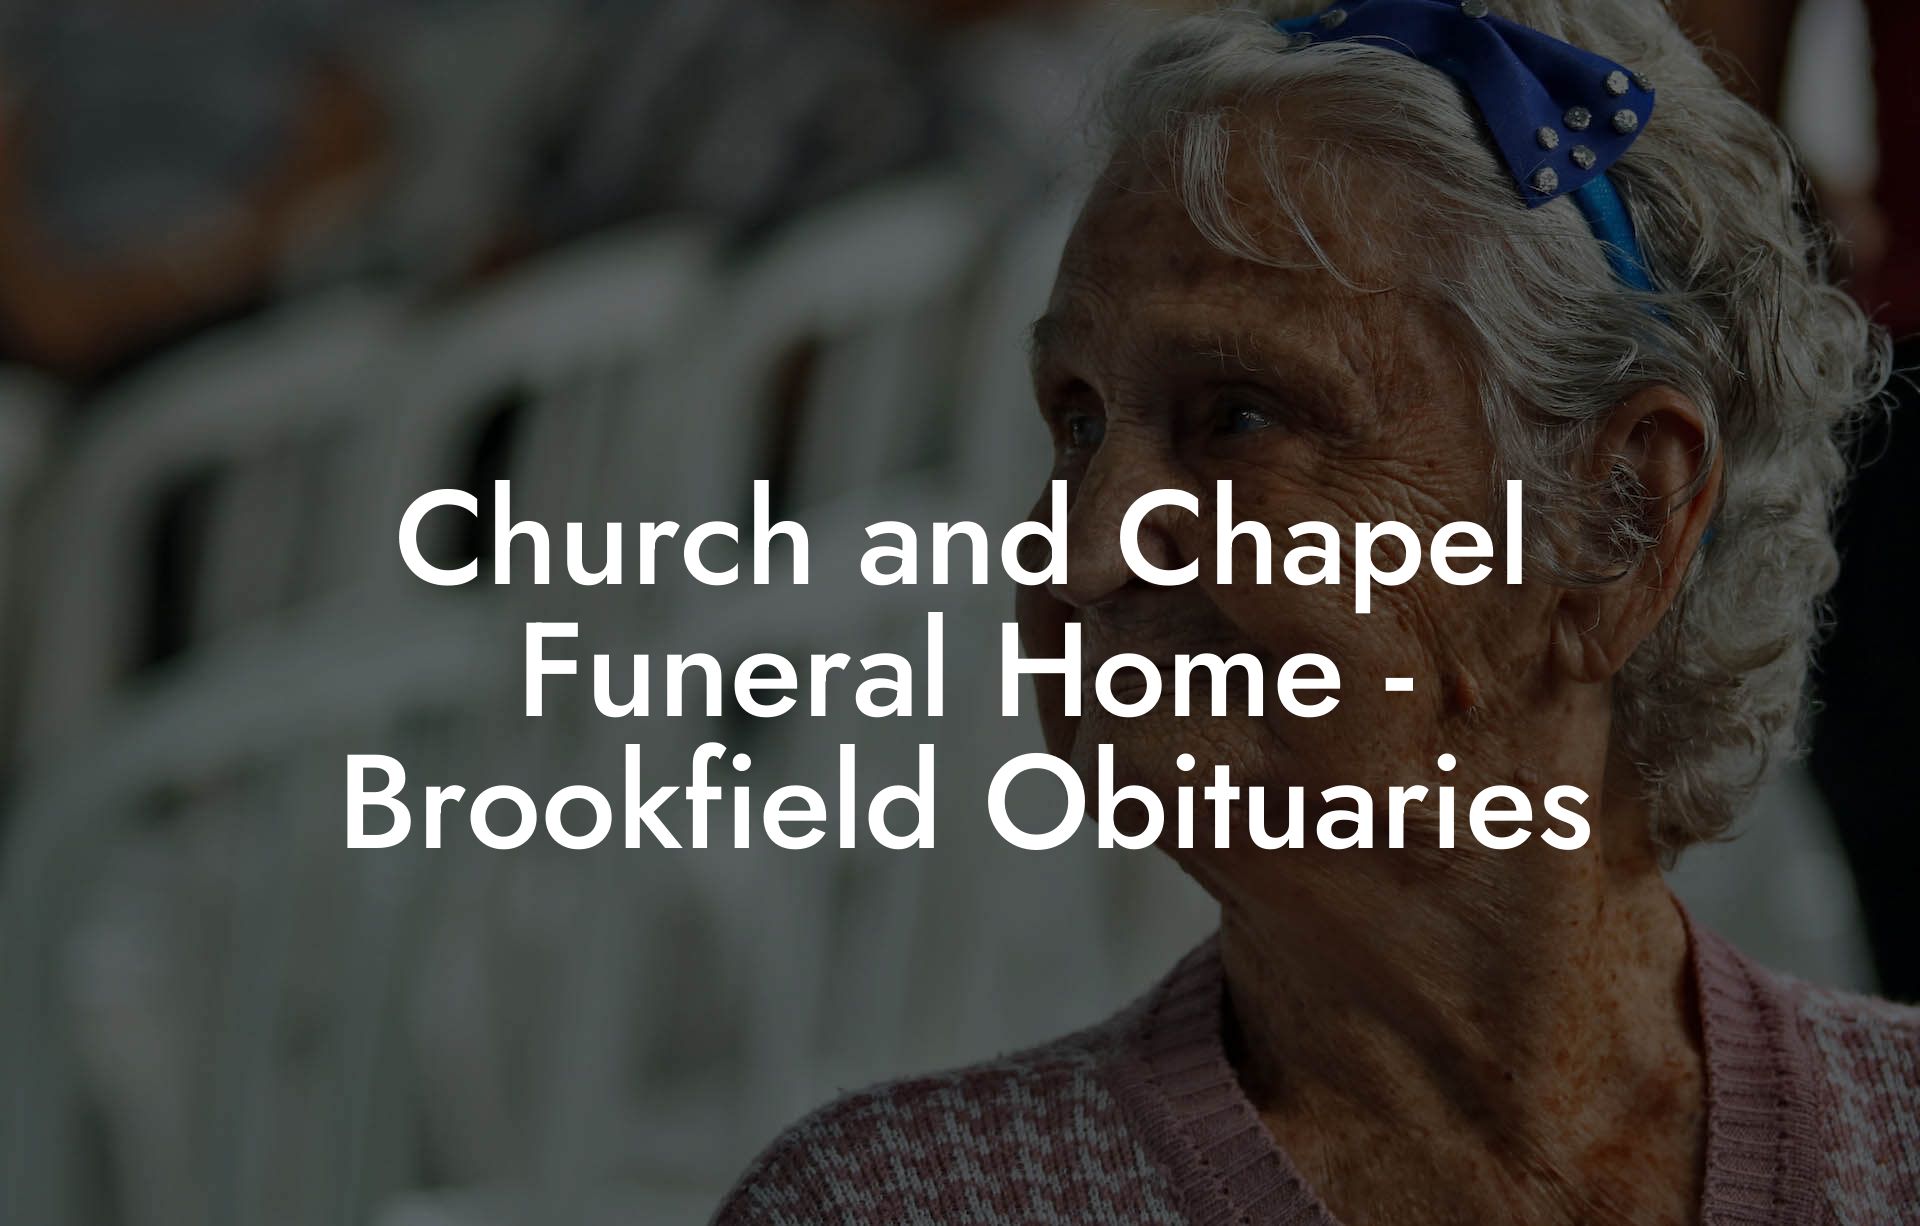 Church and Chapel Funeral Home - Brookfield Obituaries